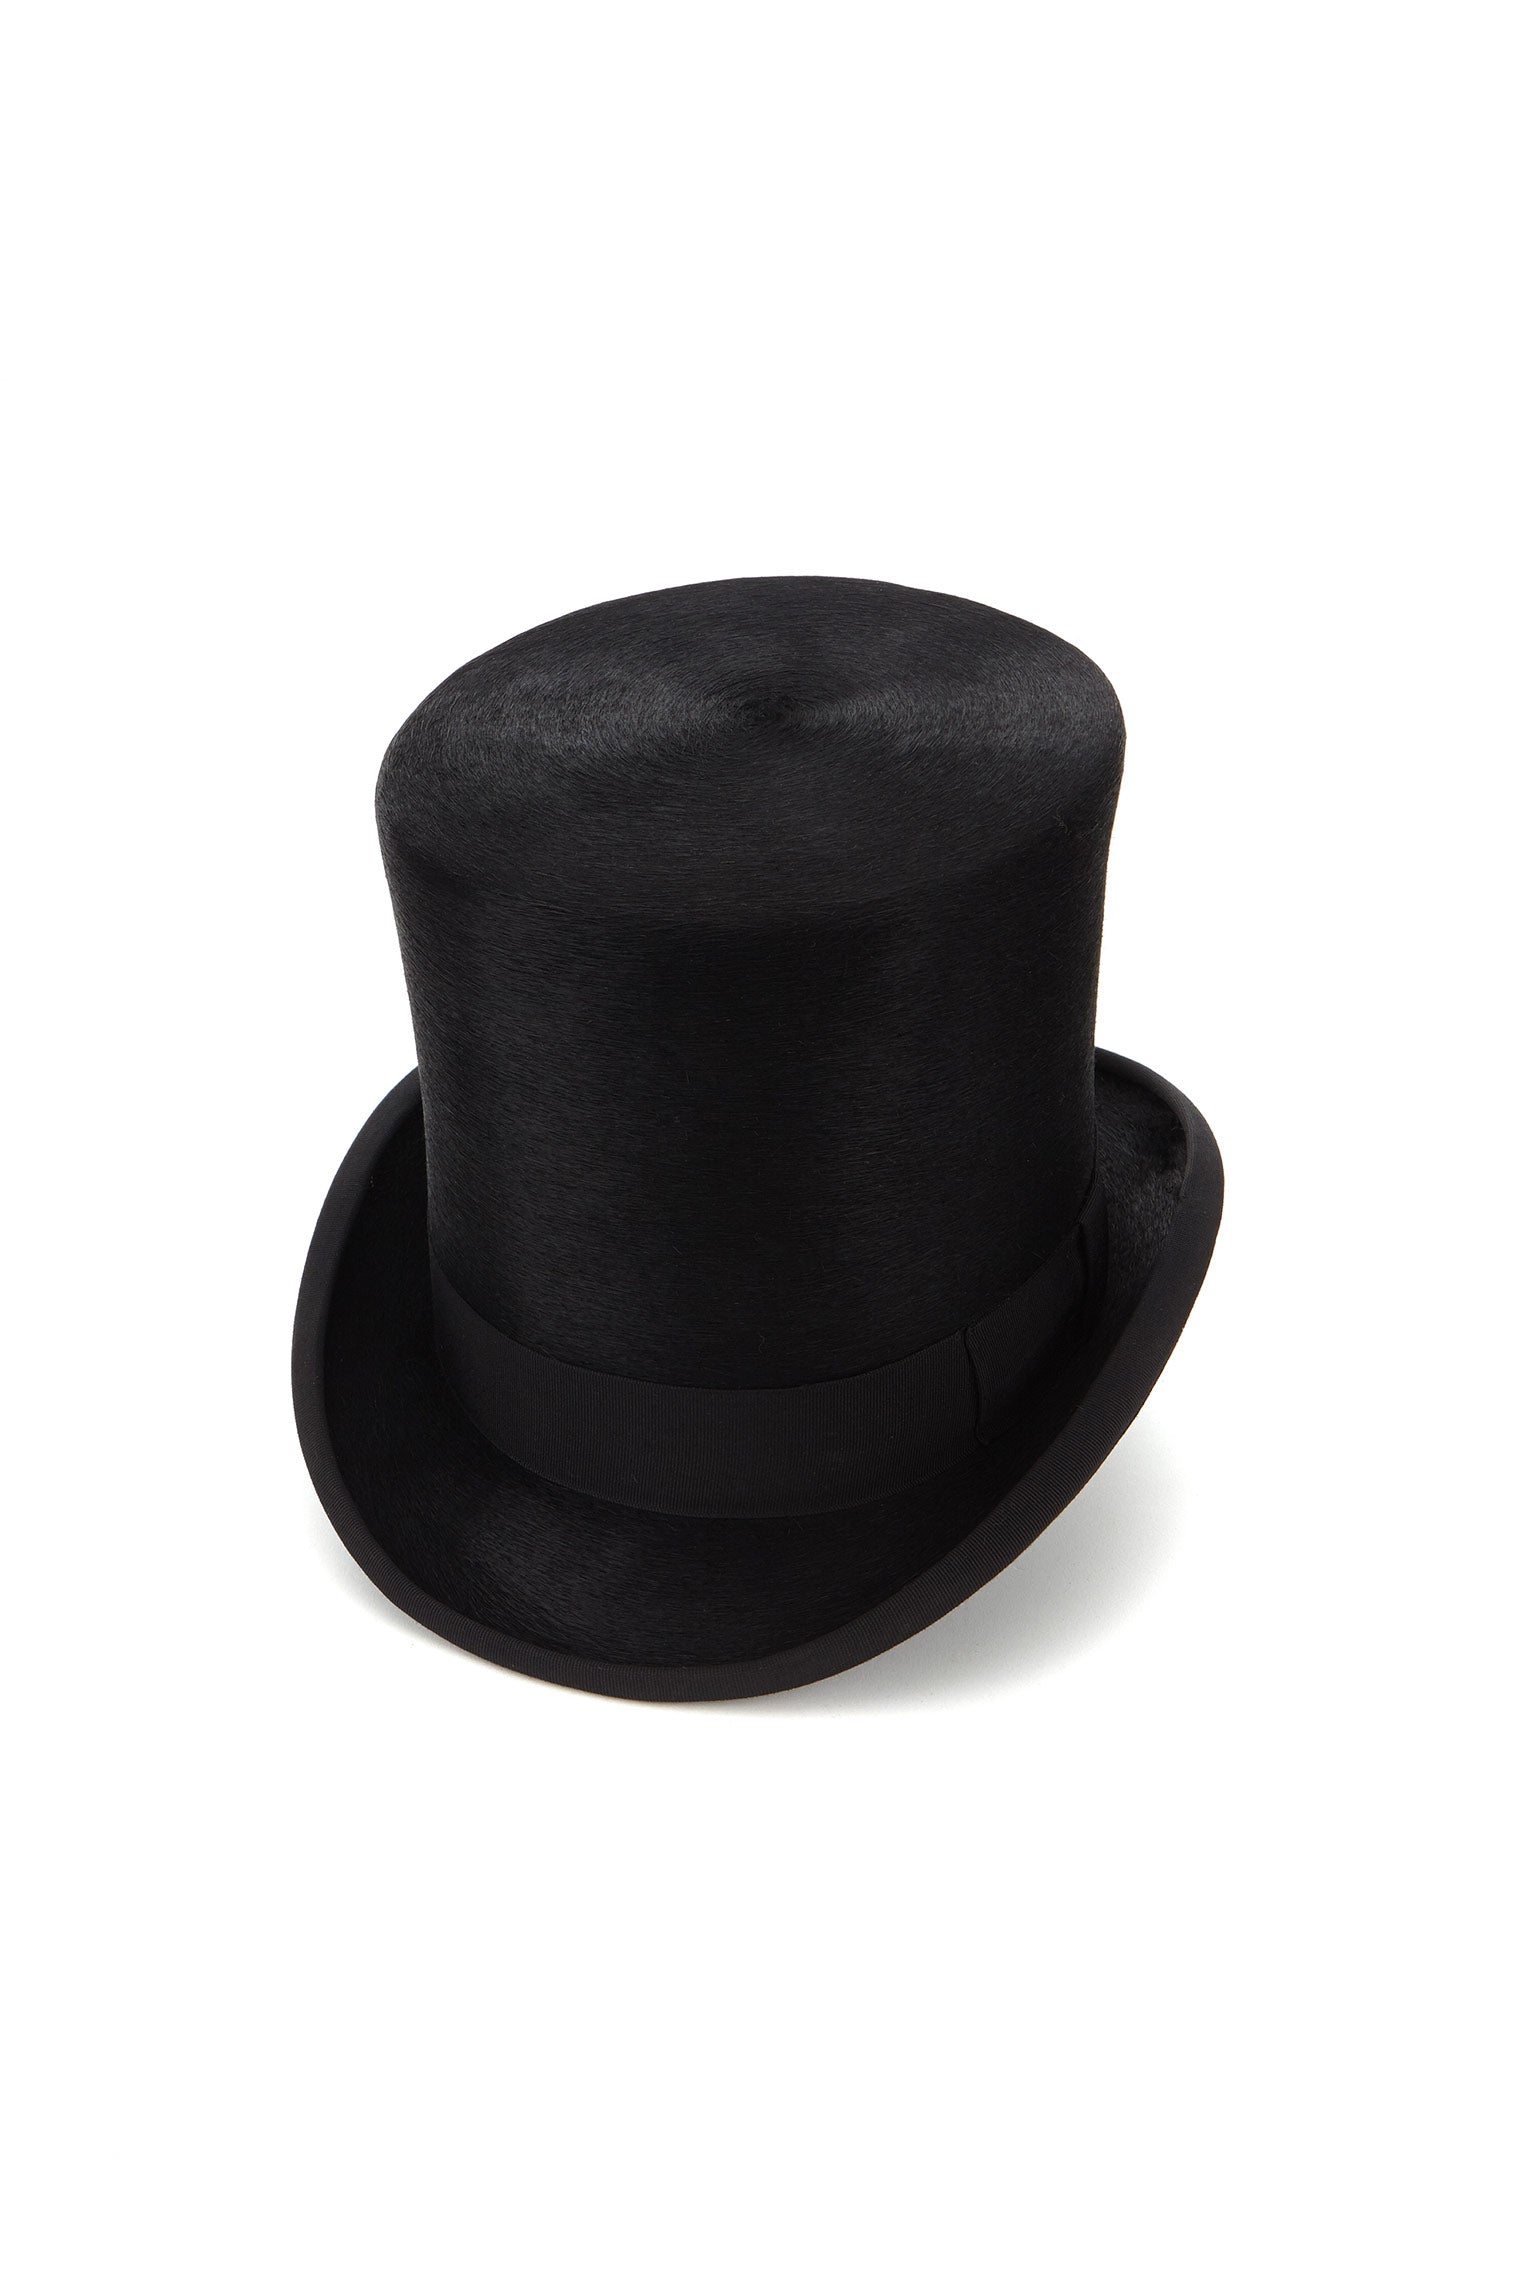 Westminster High Crown Top Hat - Royal Ascot Hats - Lock & Co. Hatters London UK